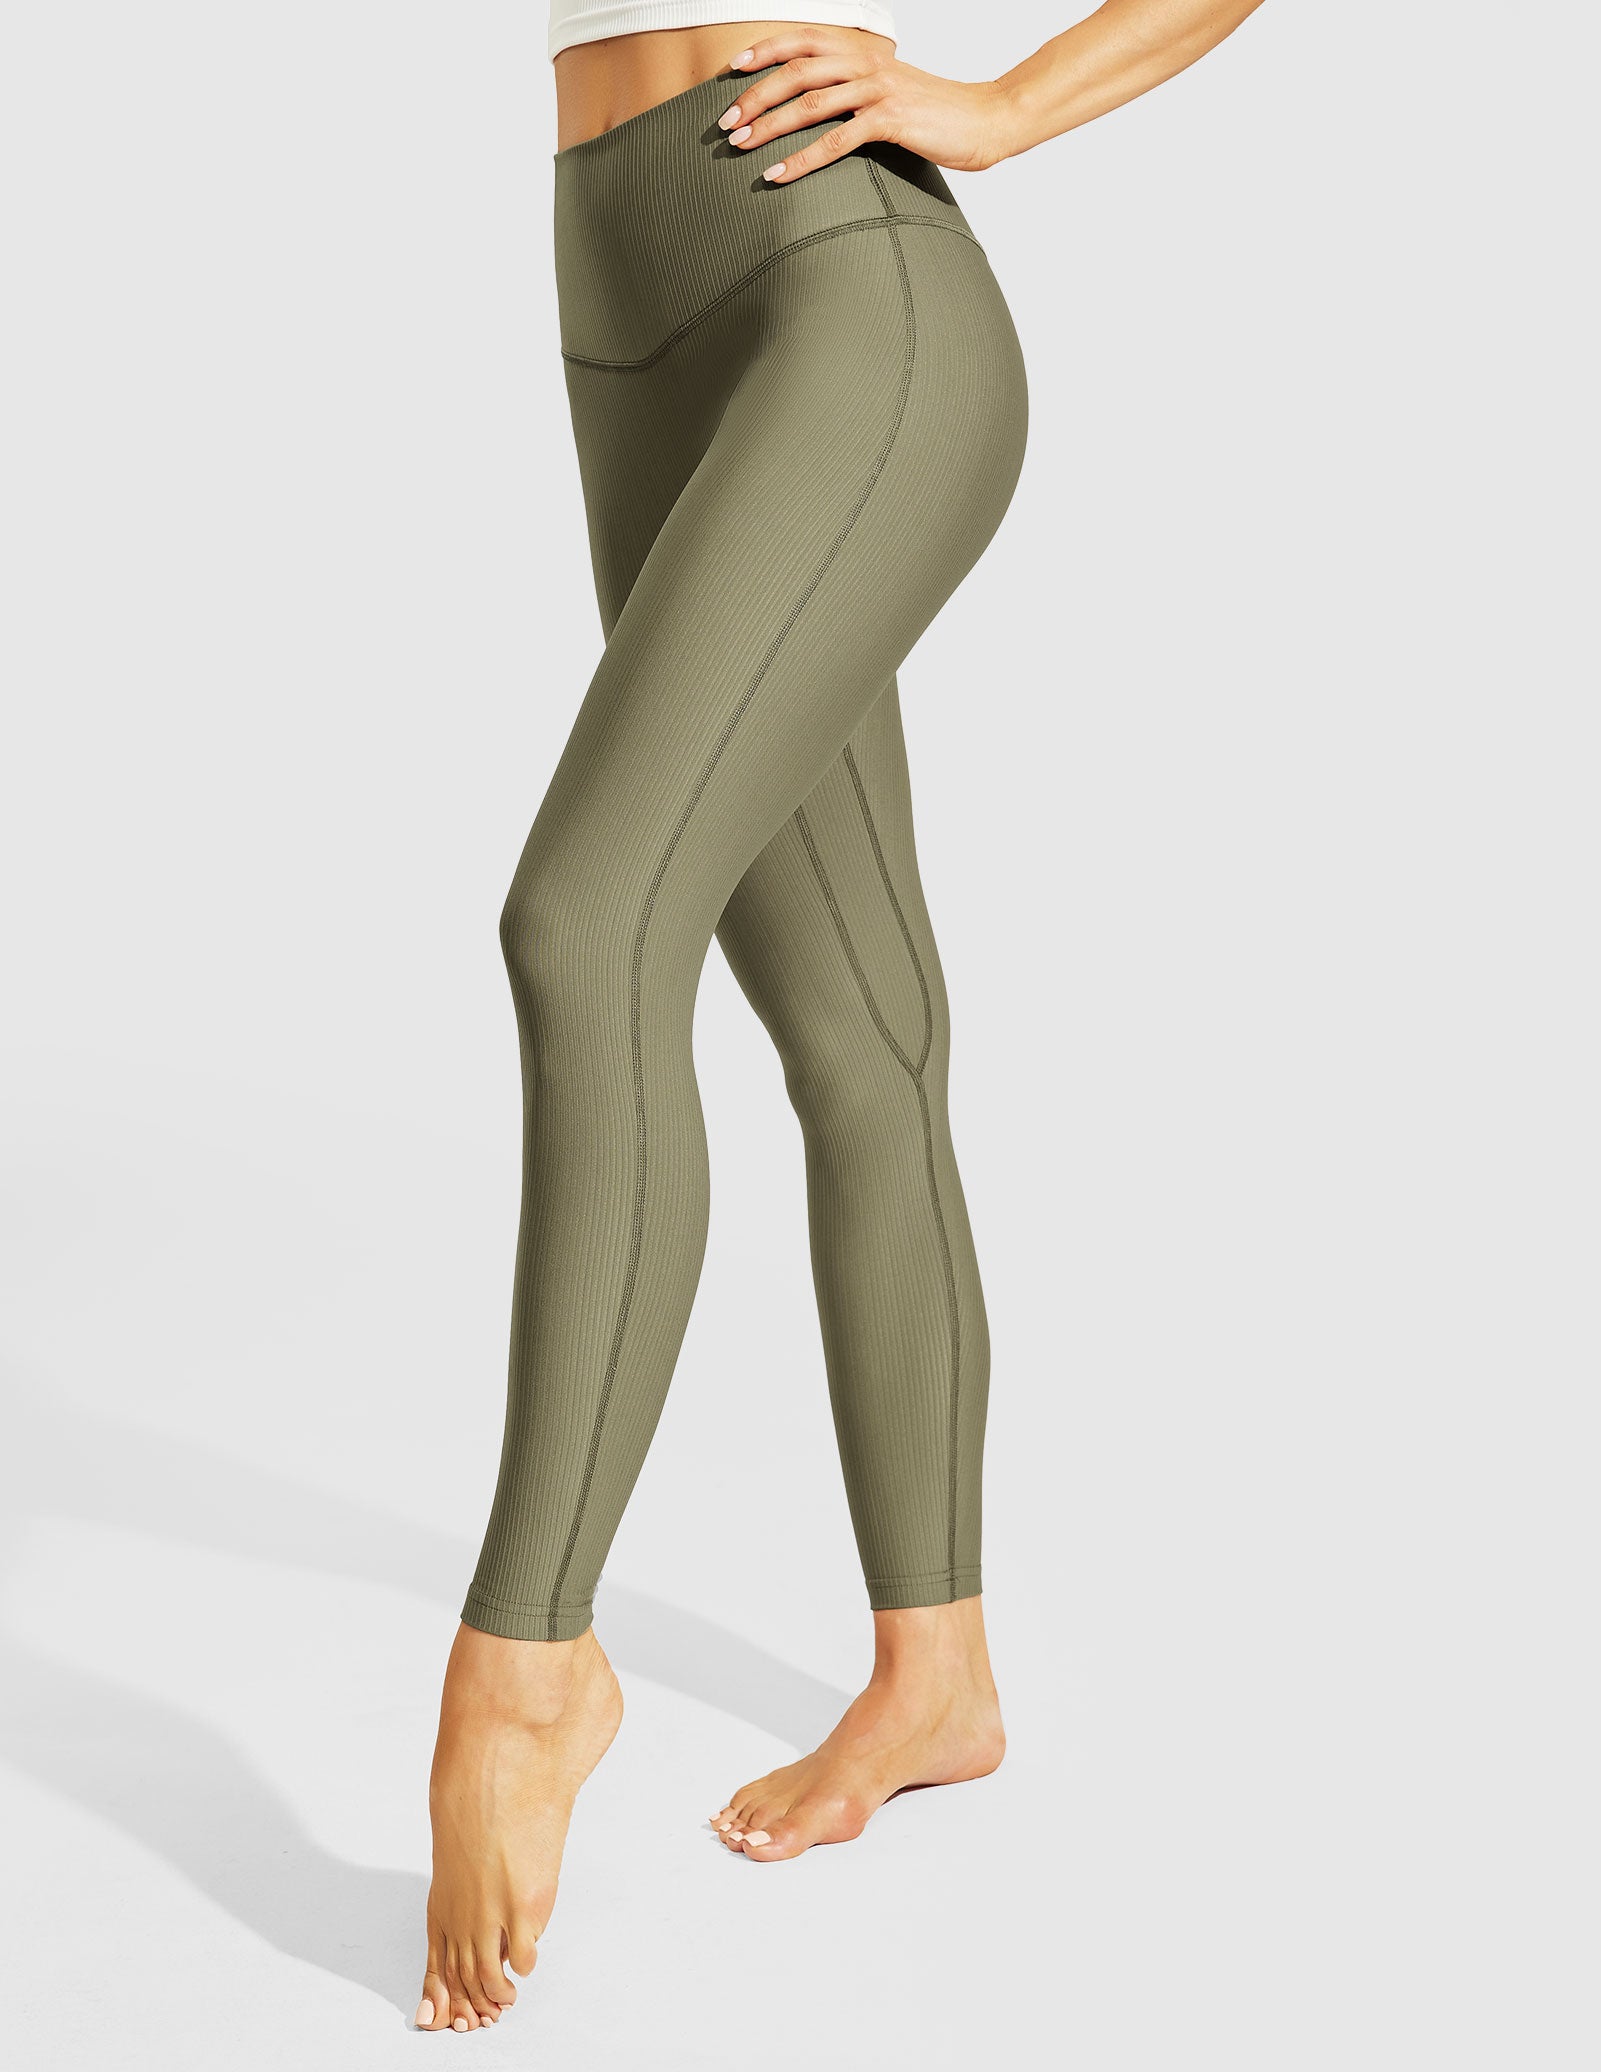 Women's High Waisted Workout Leggings with Inside Pockets